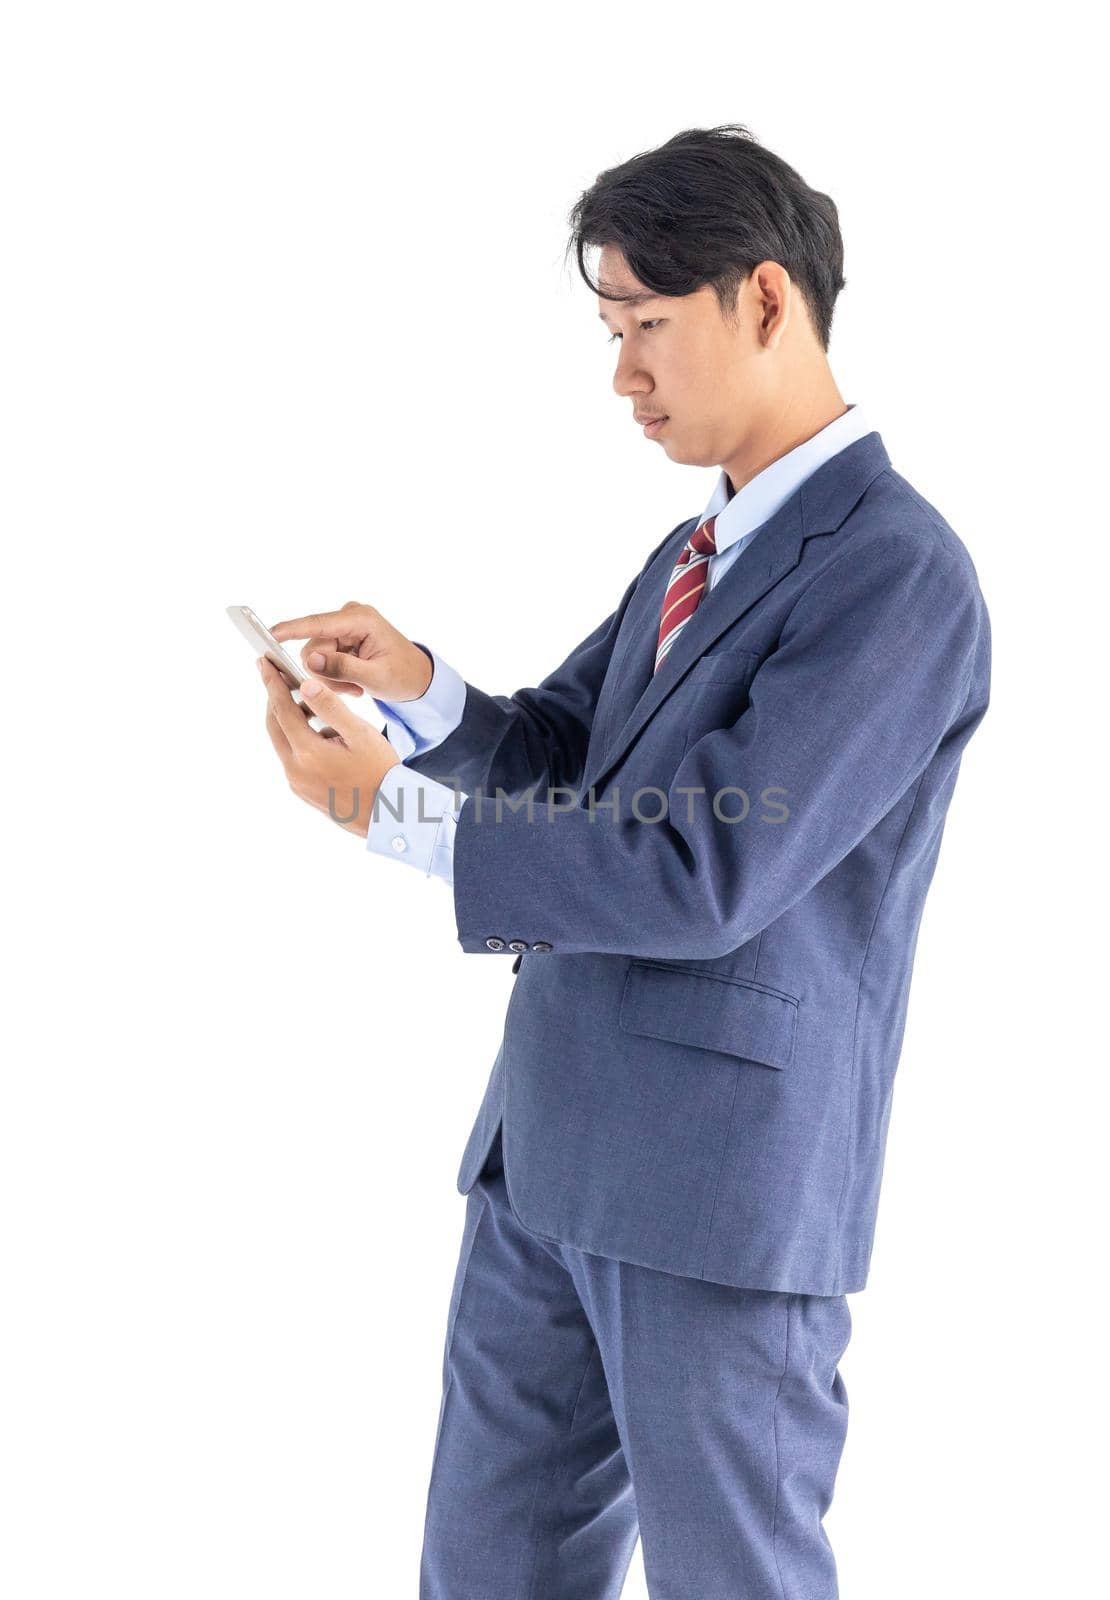 Young asian business men portrait holding phone in suit over white background